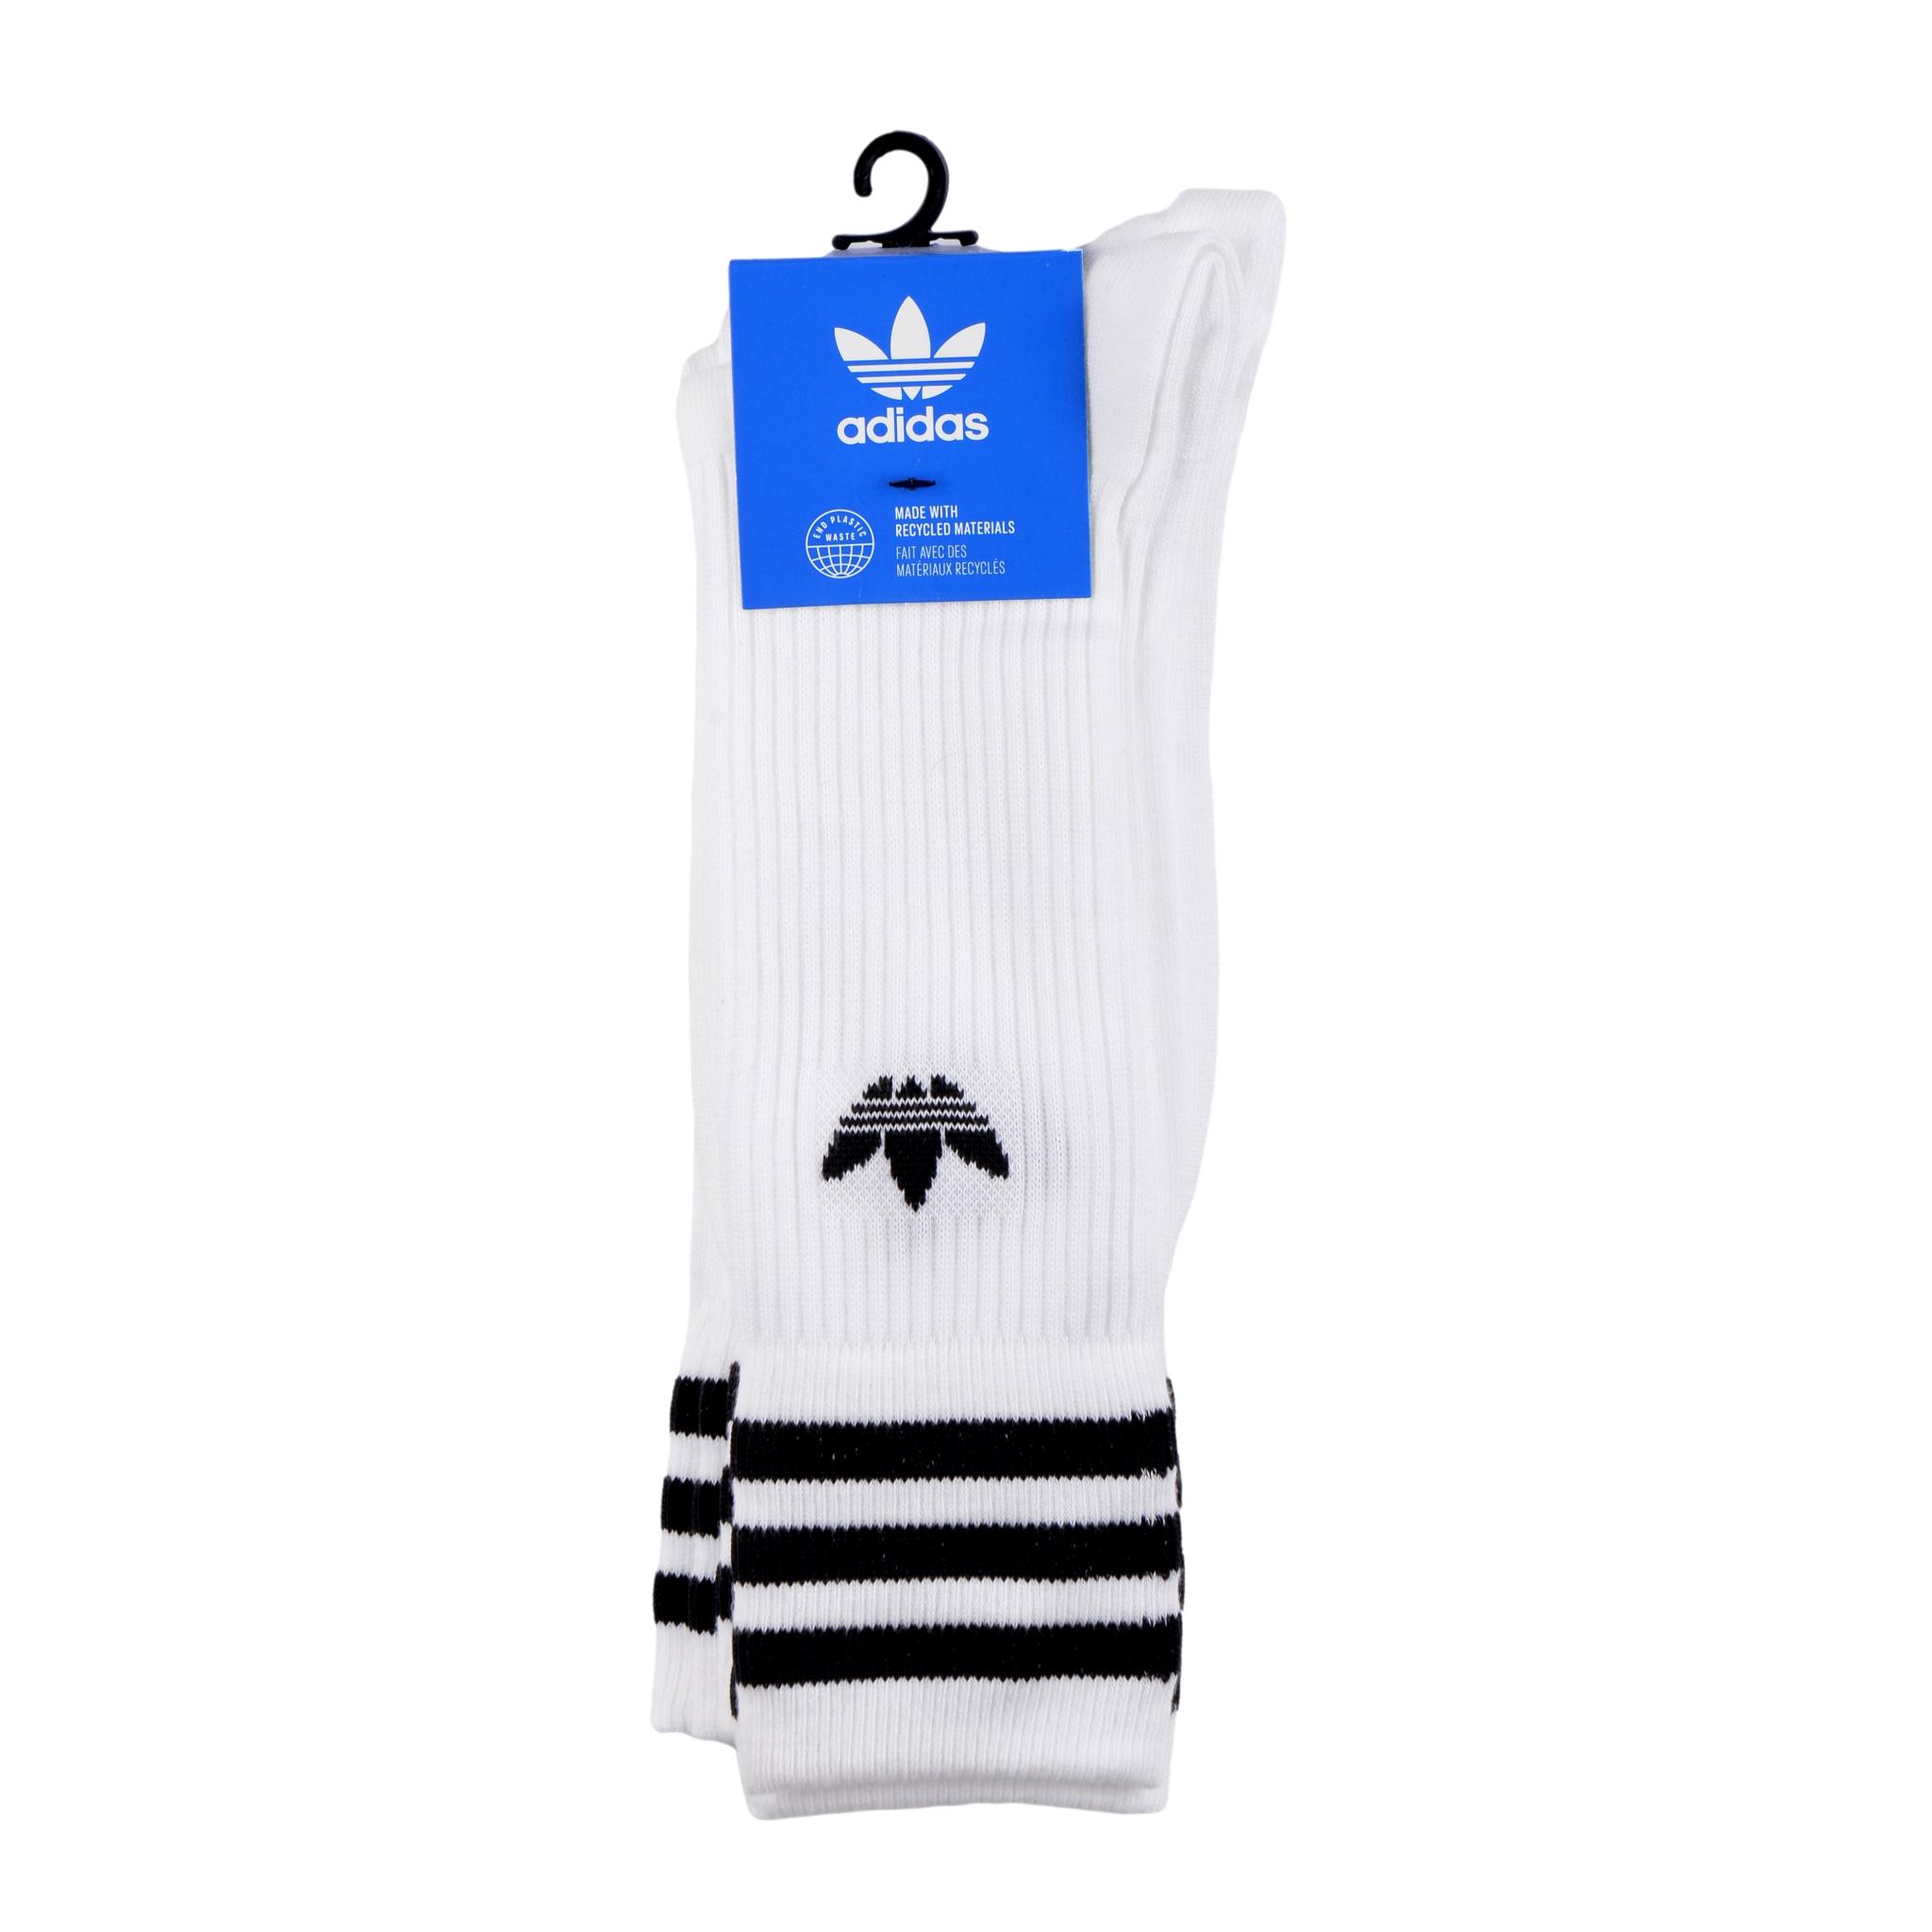 Adidas Solid Crew White 3 Pack Socks